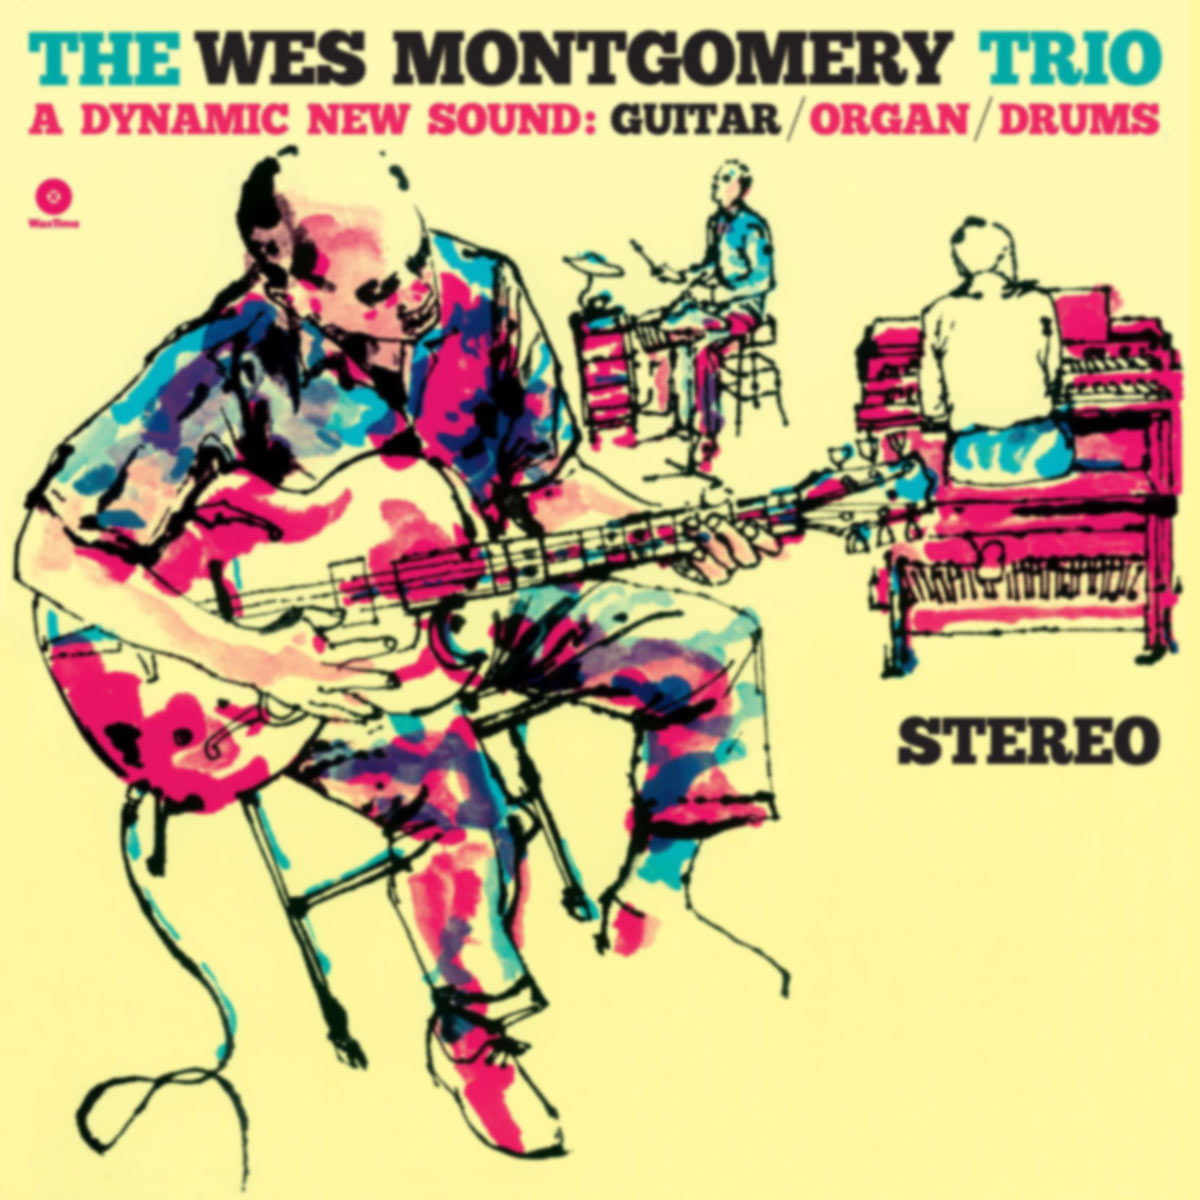 The Wes Montgomery Trio - A Dynamic New Sound